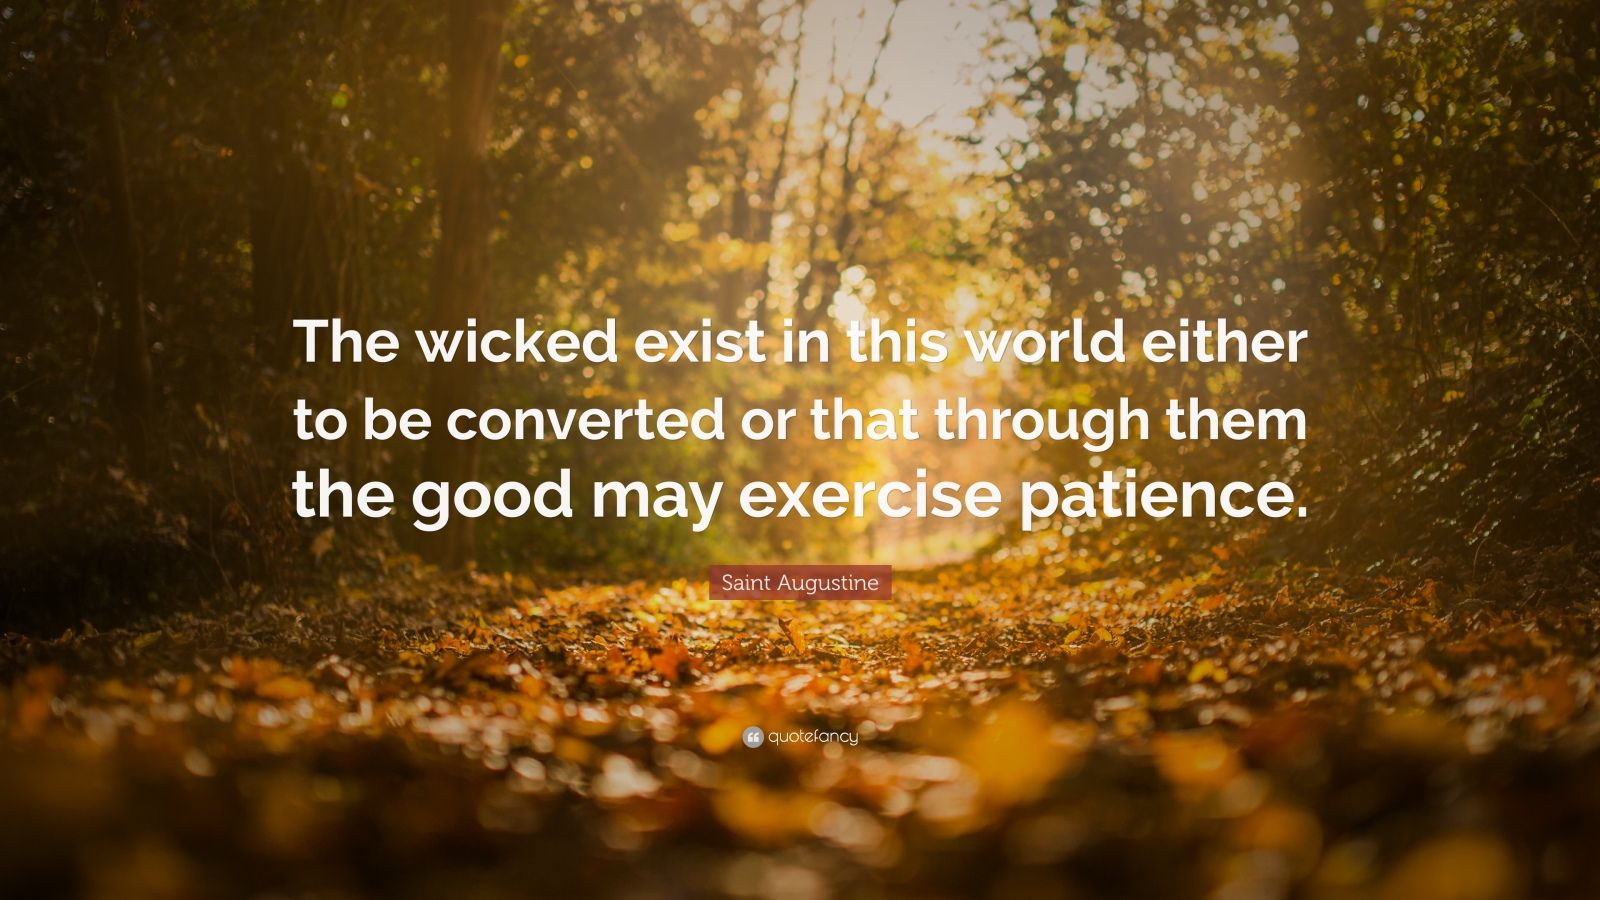 Saint Augustine Quote: “The wicked exist in this world either to be ...